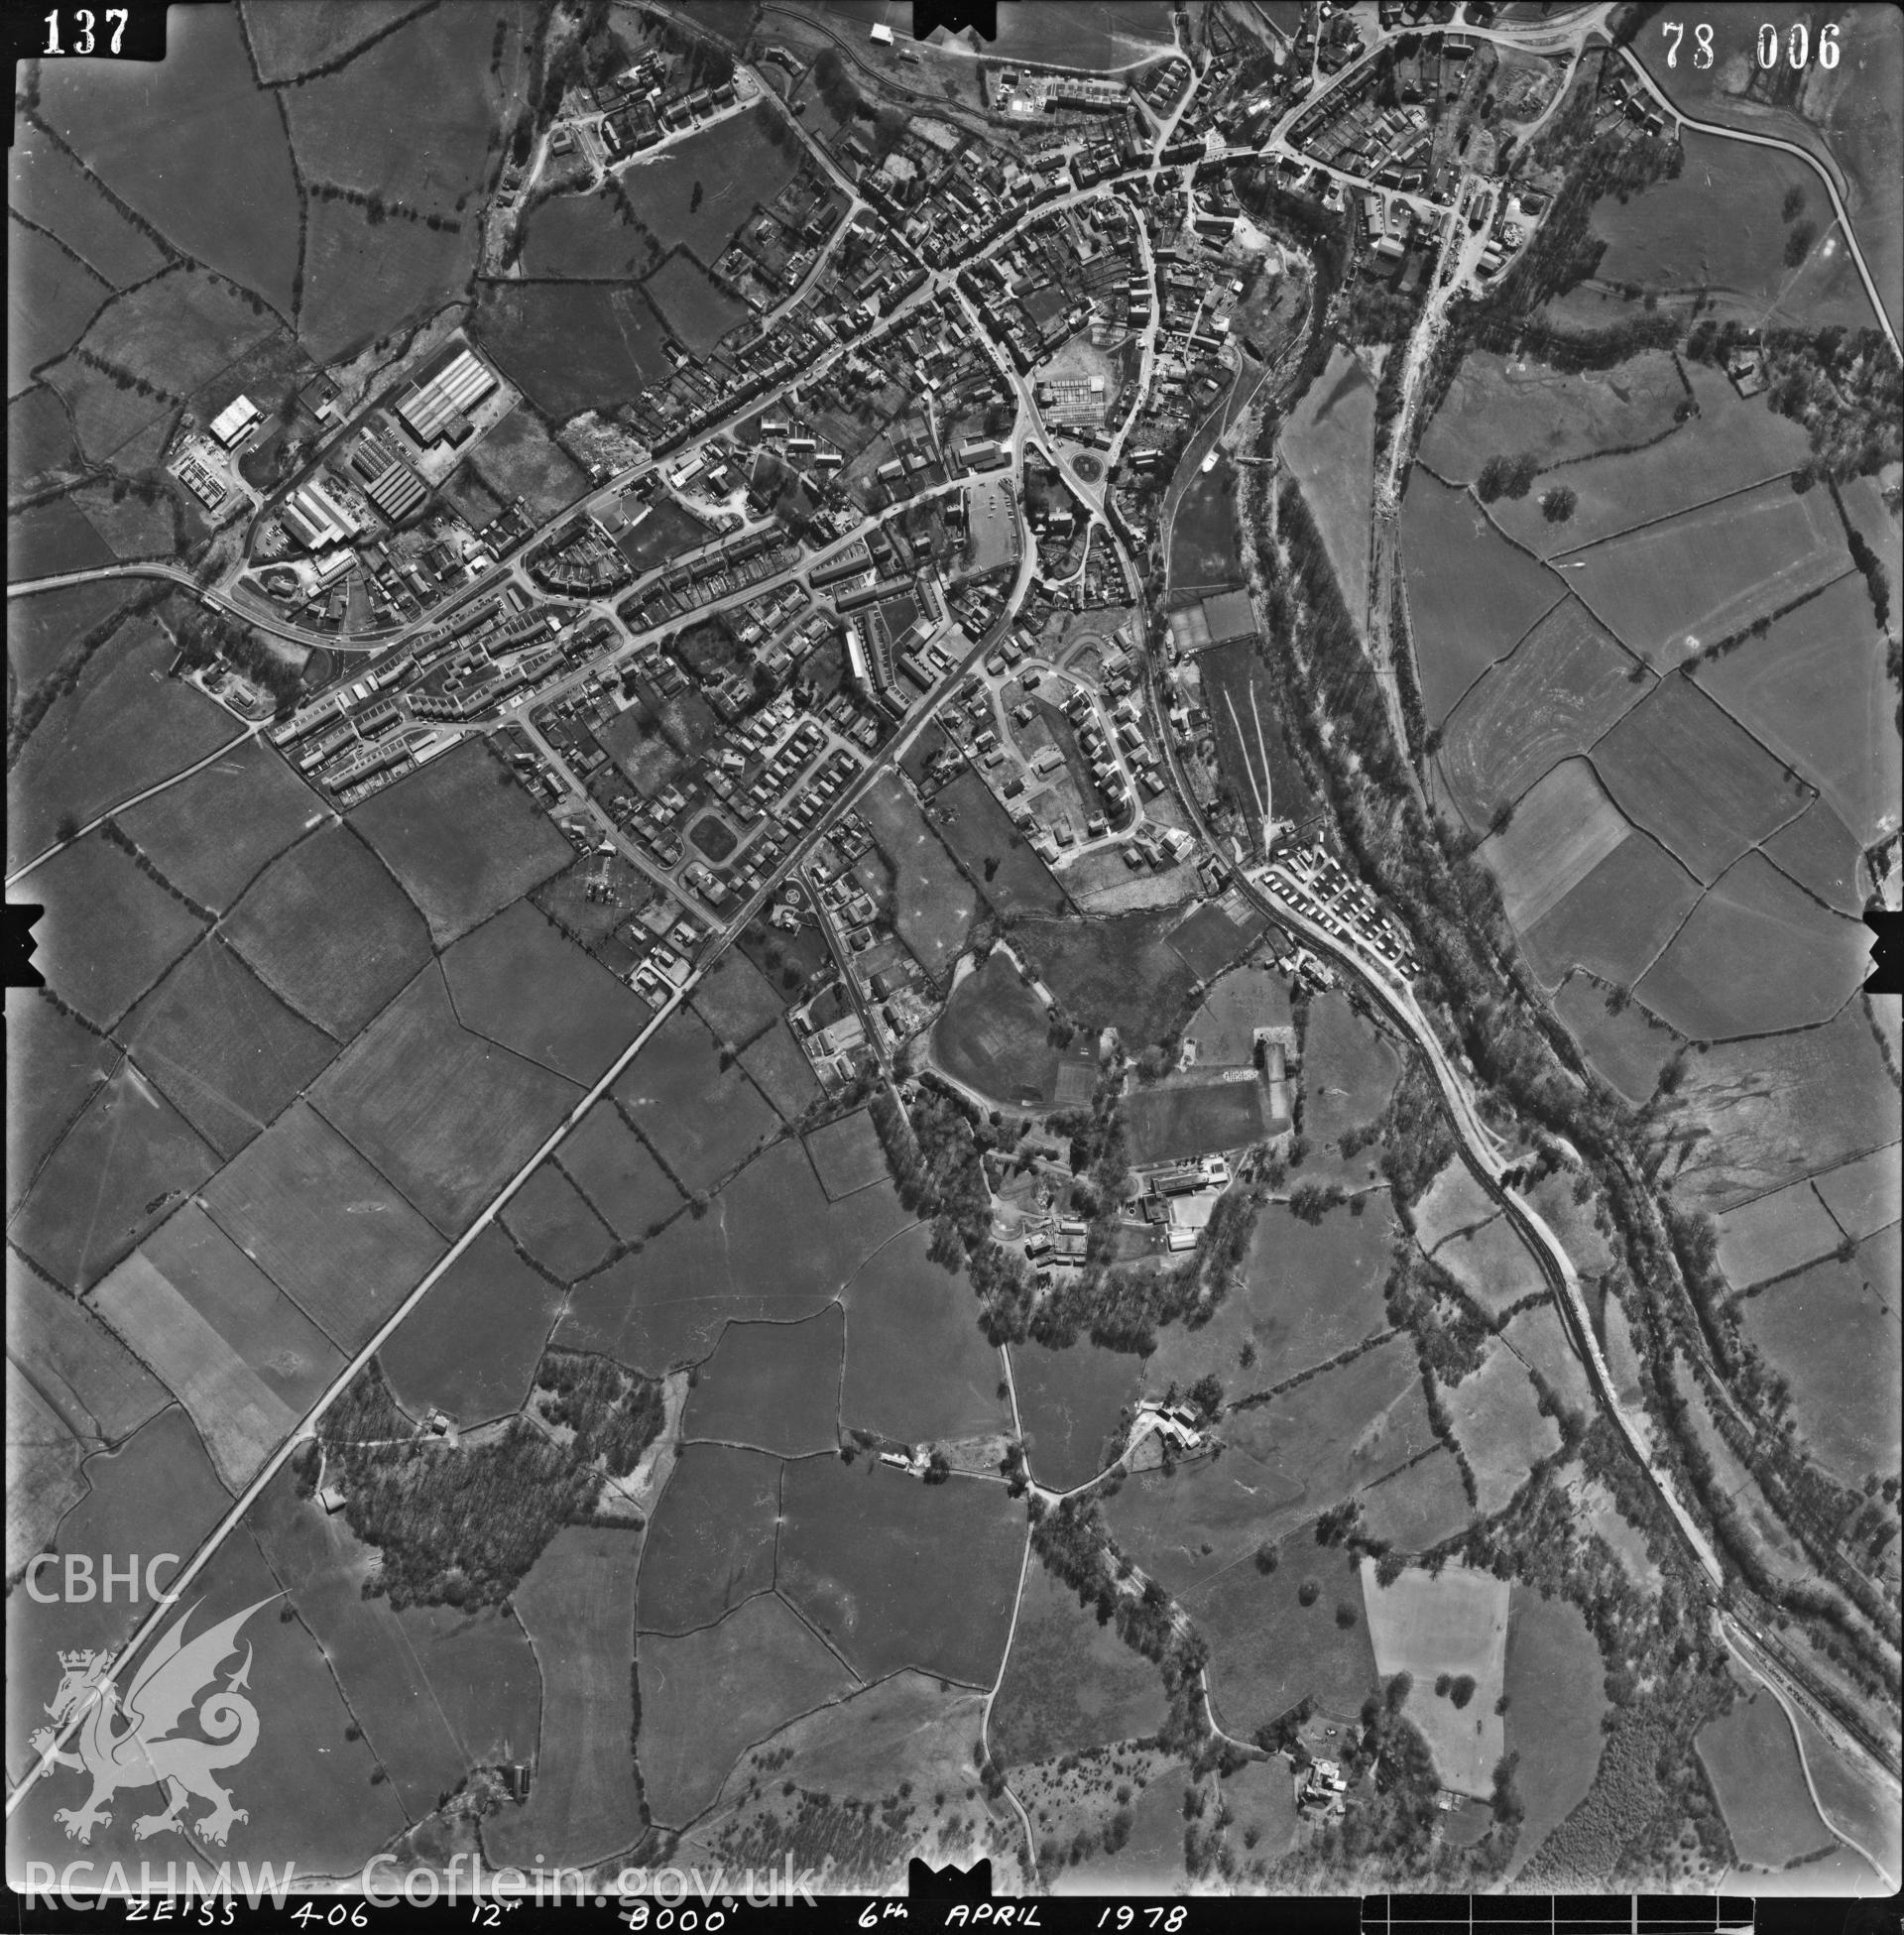 Digitized copy of an aerial photograph showing Rhayader area, taken by Ordnance Survey, 1978.